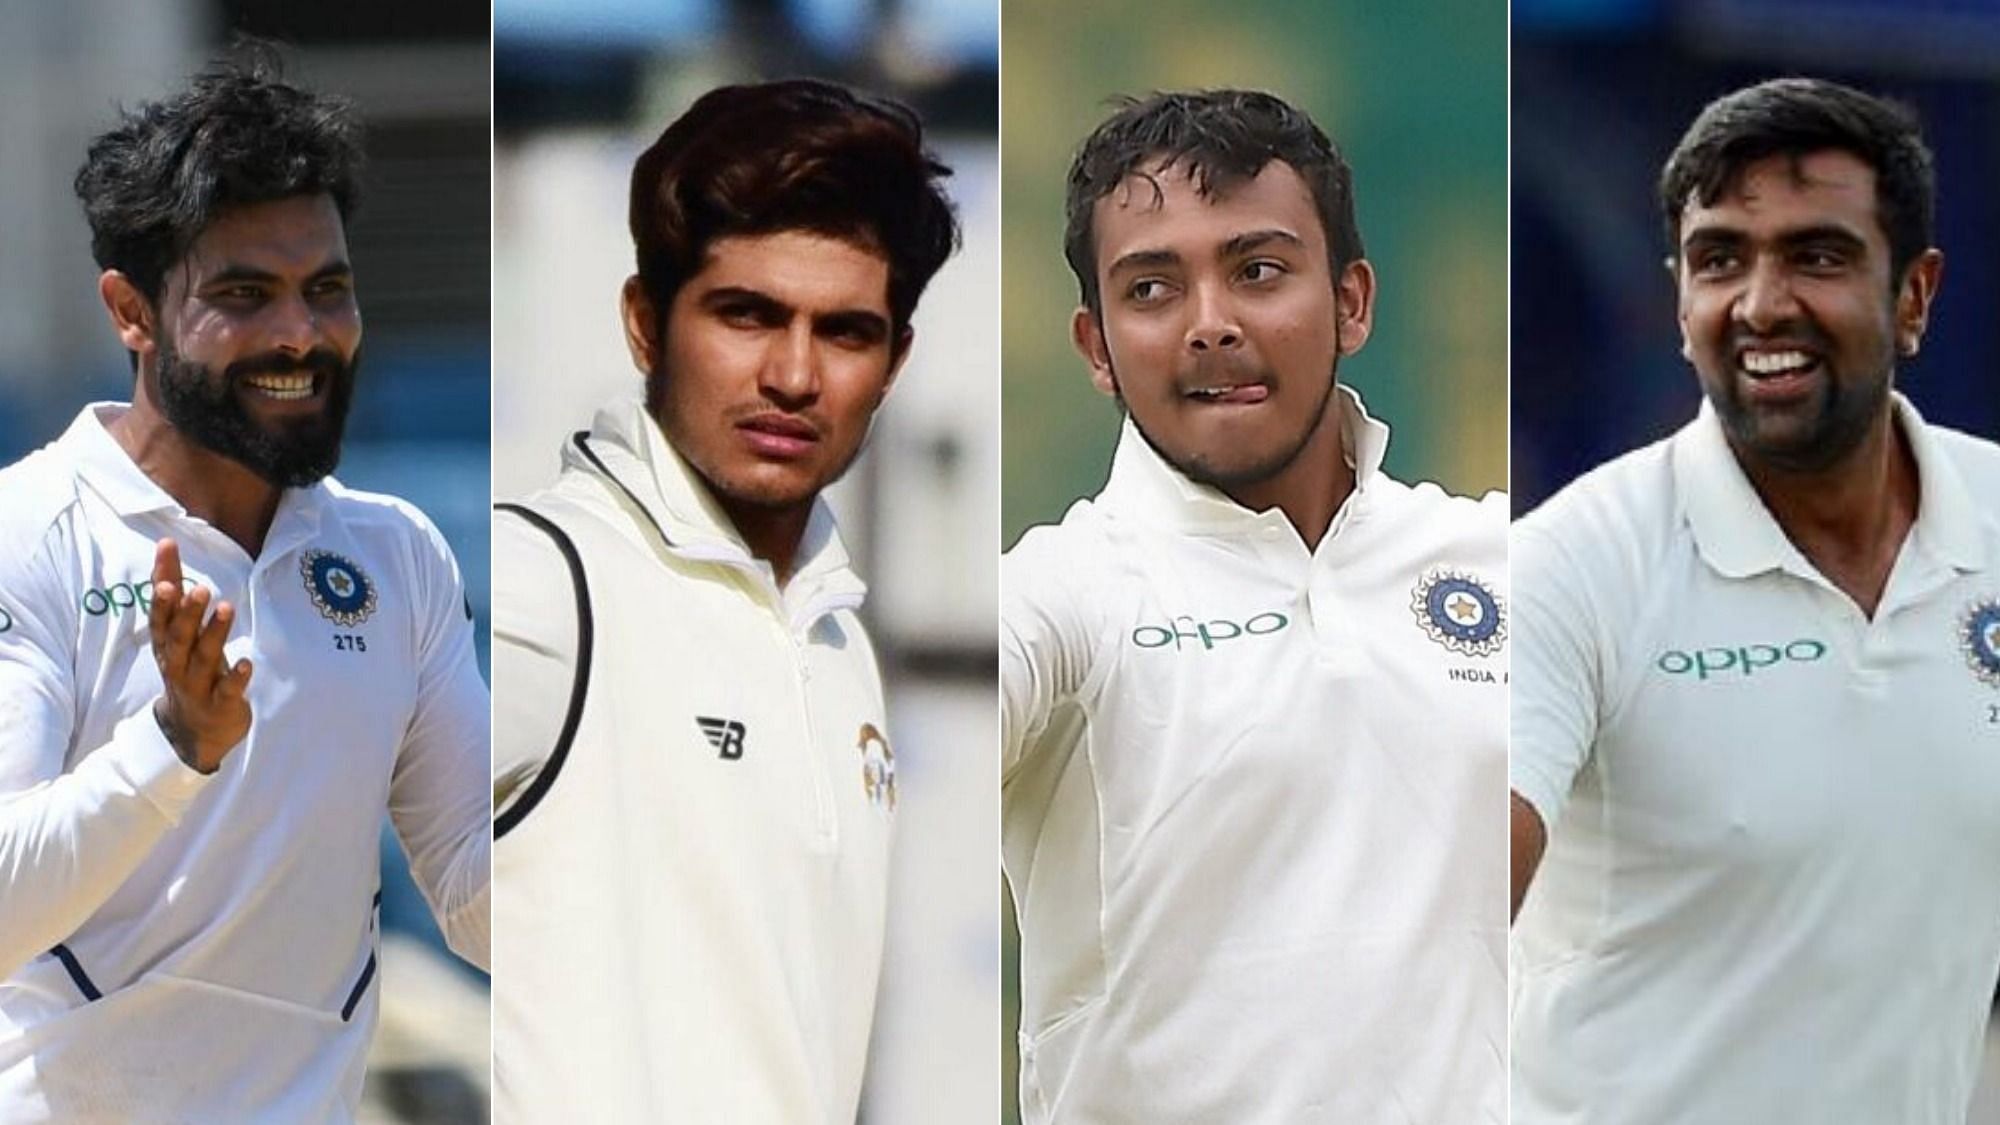 The focus will be on Ravindra Jadeja and Ravichandran Ashwin to impress on the flat deck while Shubman Gill and Prithvi Shaw will aim to book the opener’s slot.